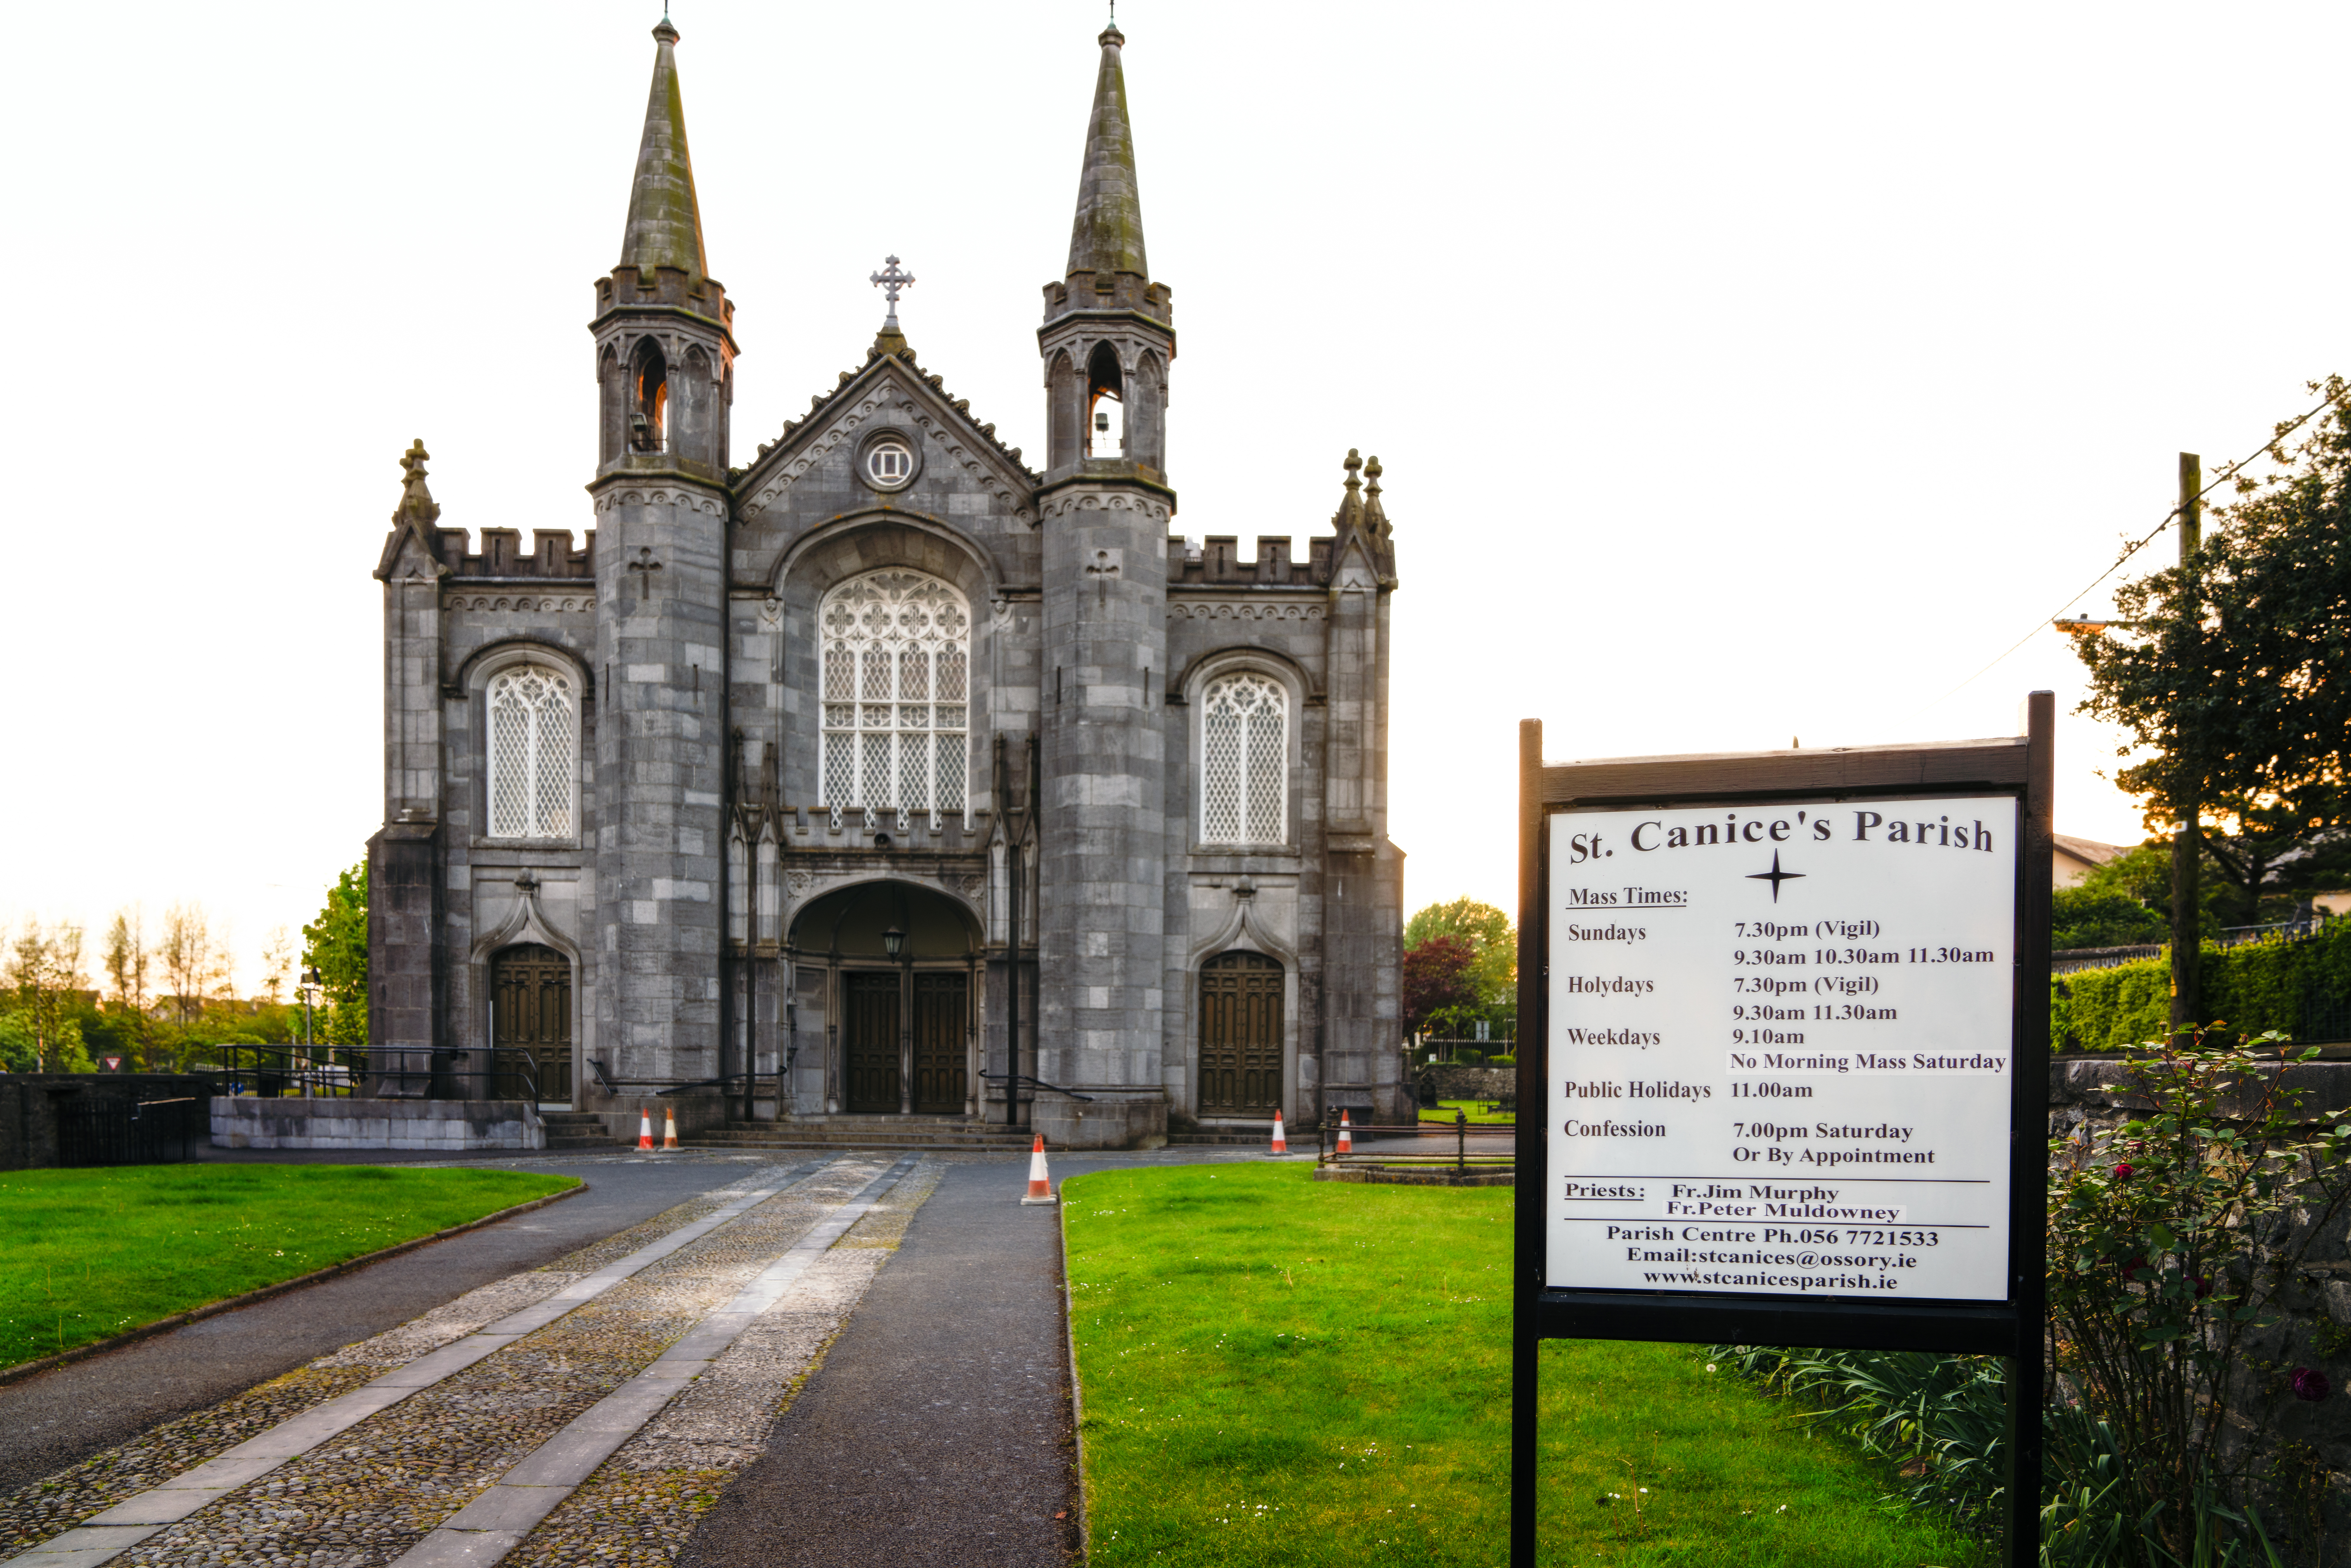 VISIT CANICE'S RC CHURCH